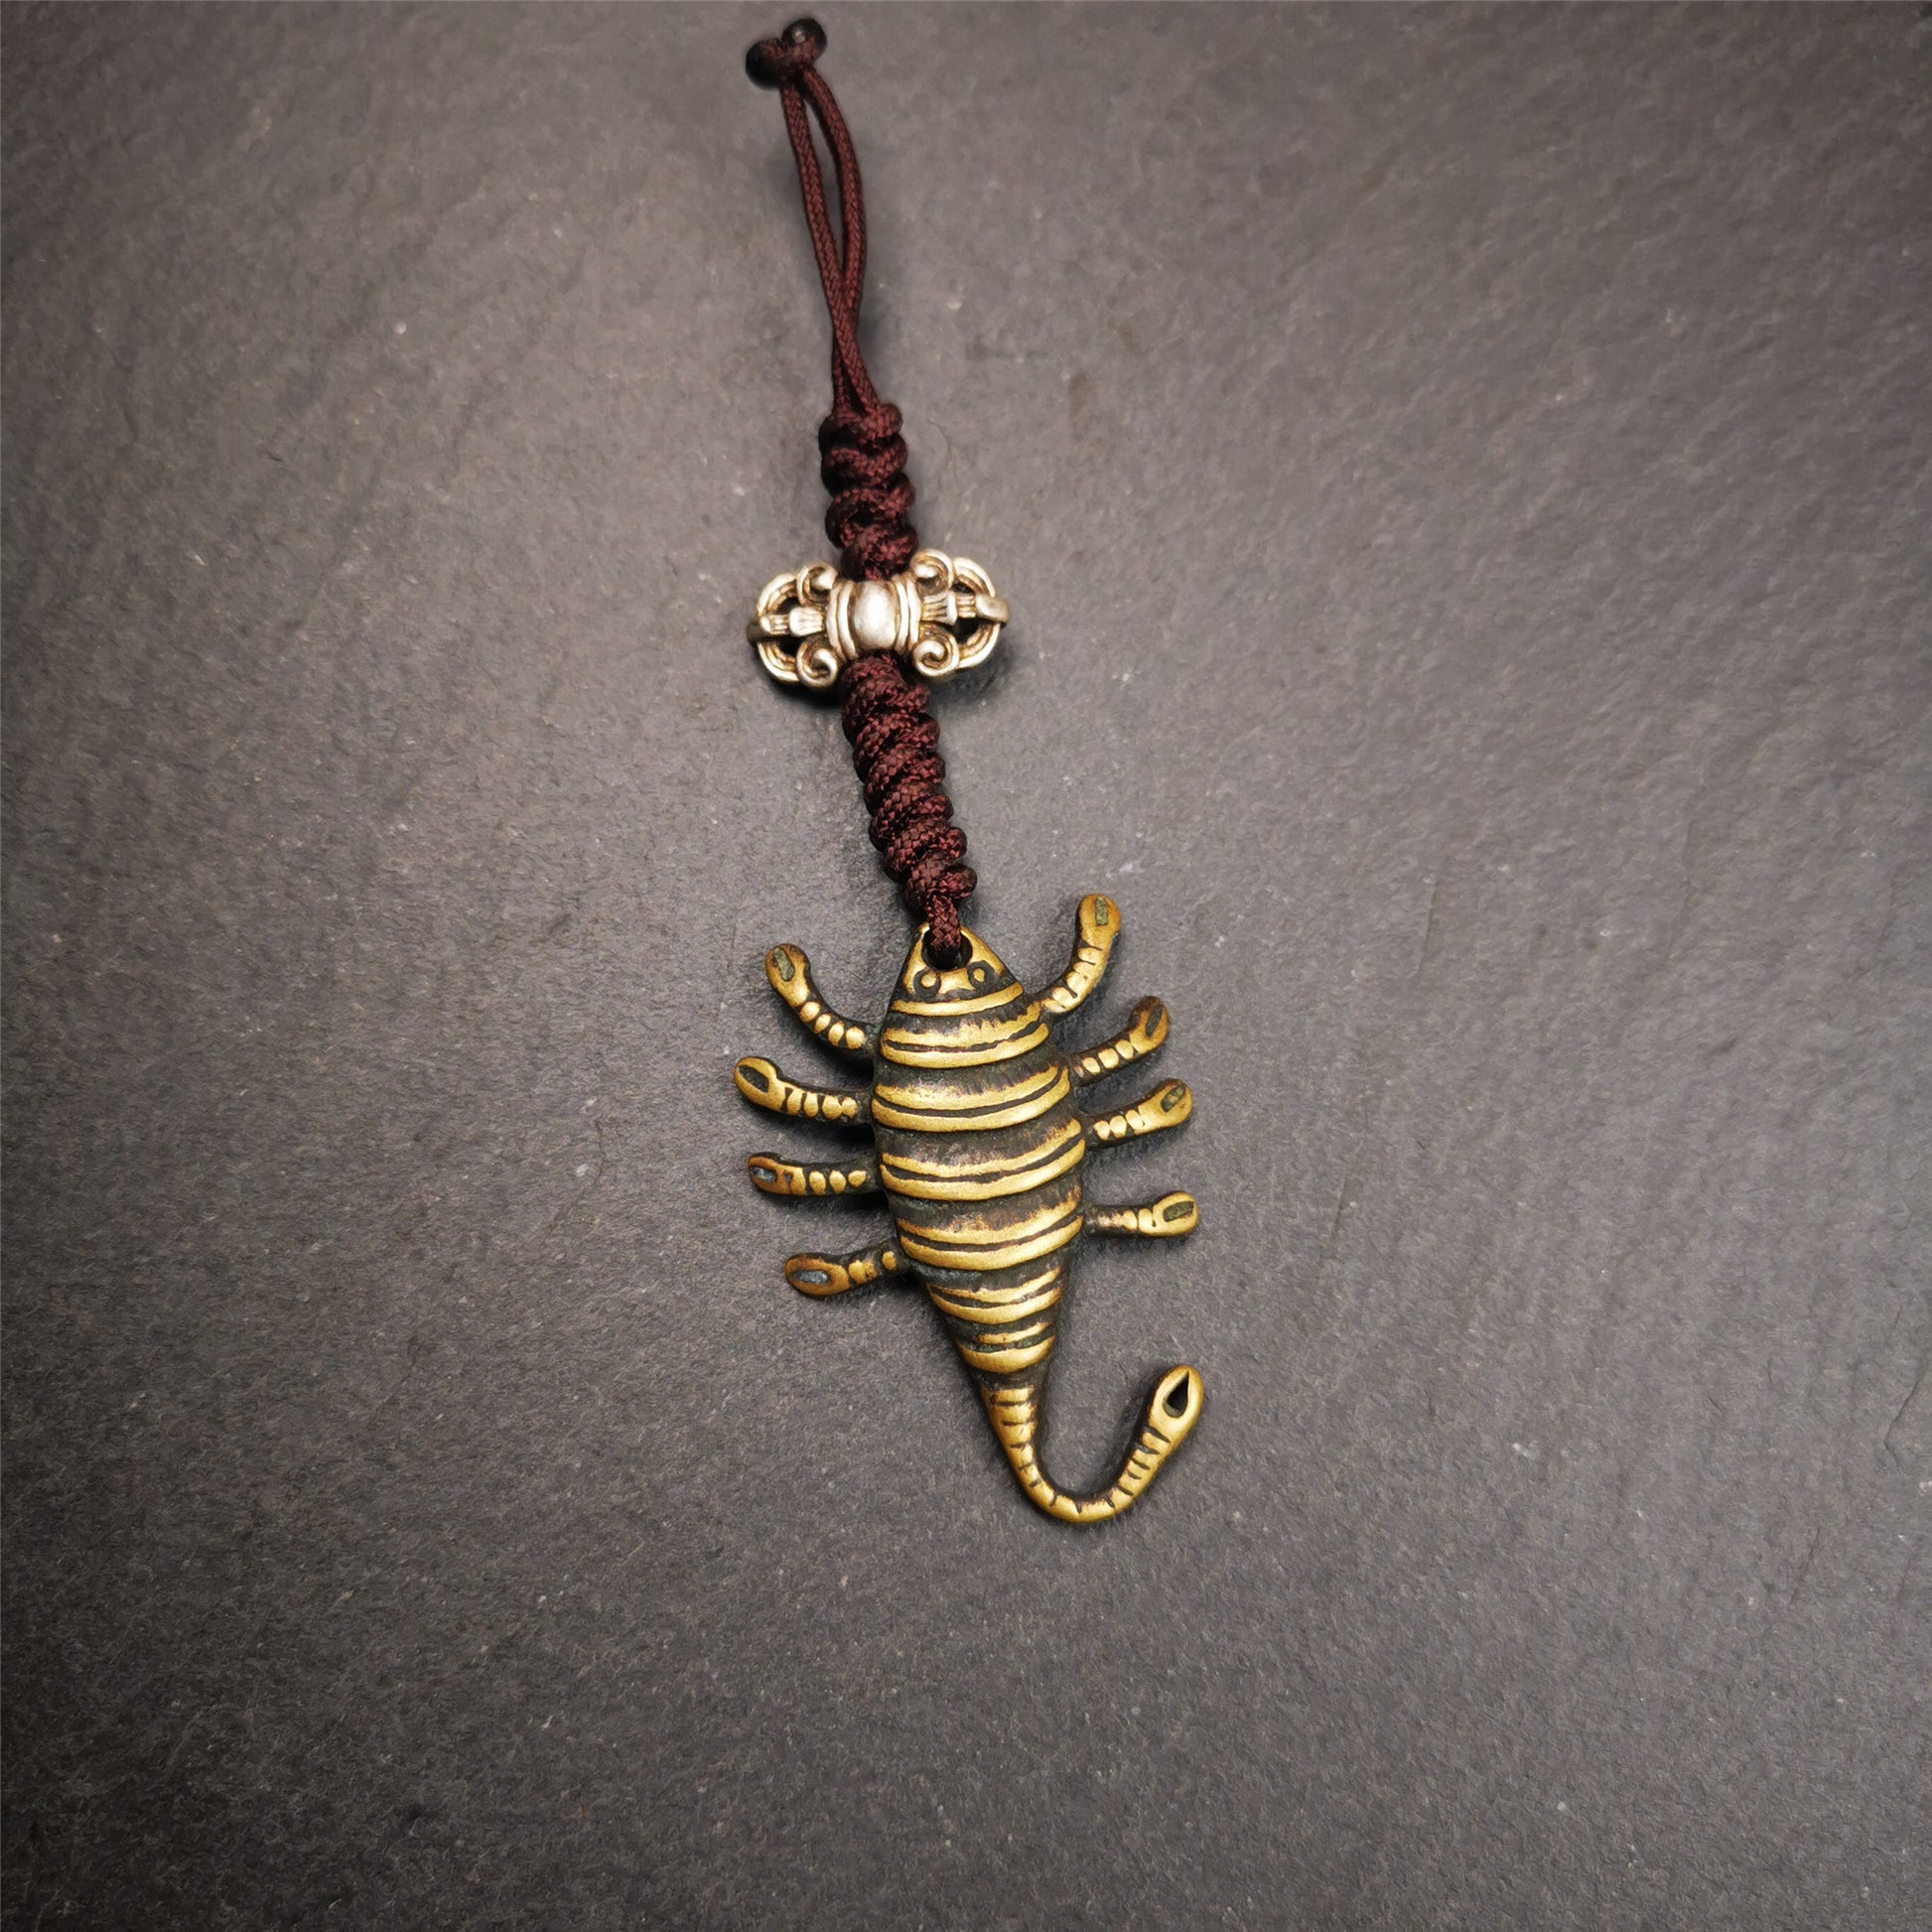 This scorpion amulet is collect from Baiyu Tibet,it is made of brass,yellow color,size is 1.57 inch. You can make it into a necklace pendant, bag hanging,keychain, or just put it on your desk,as an ornament.